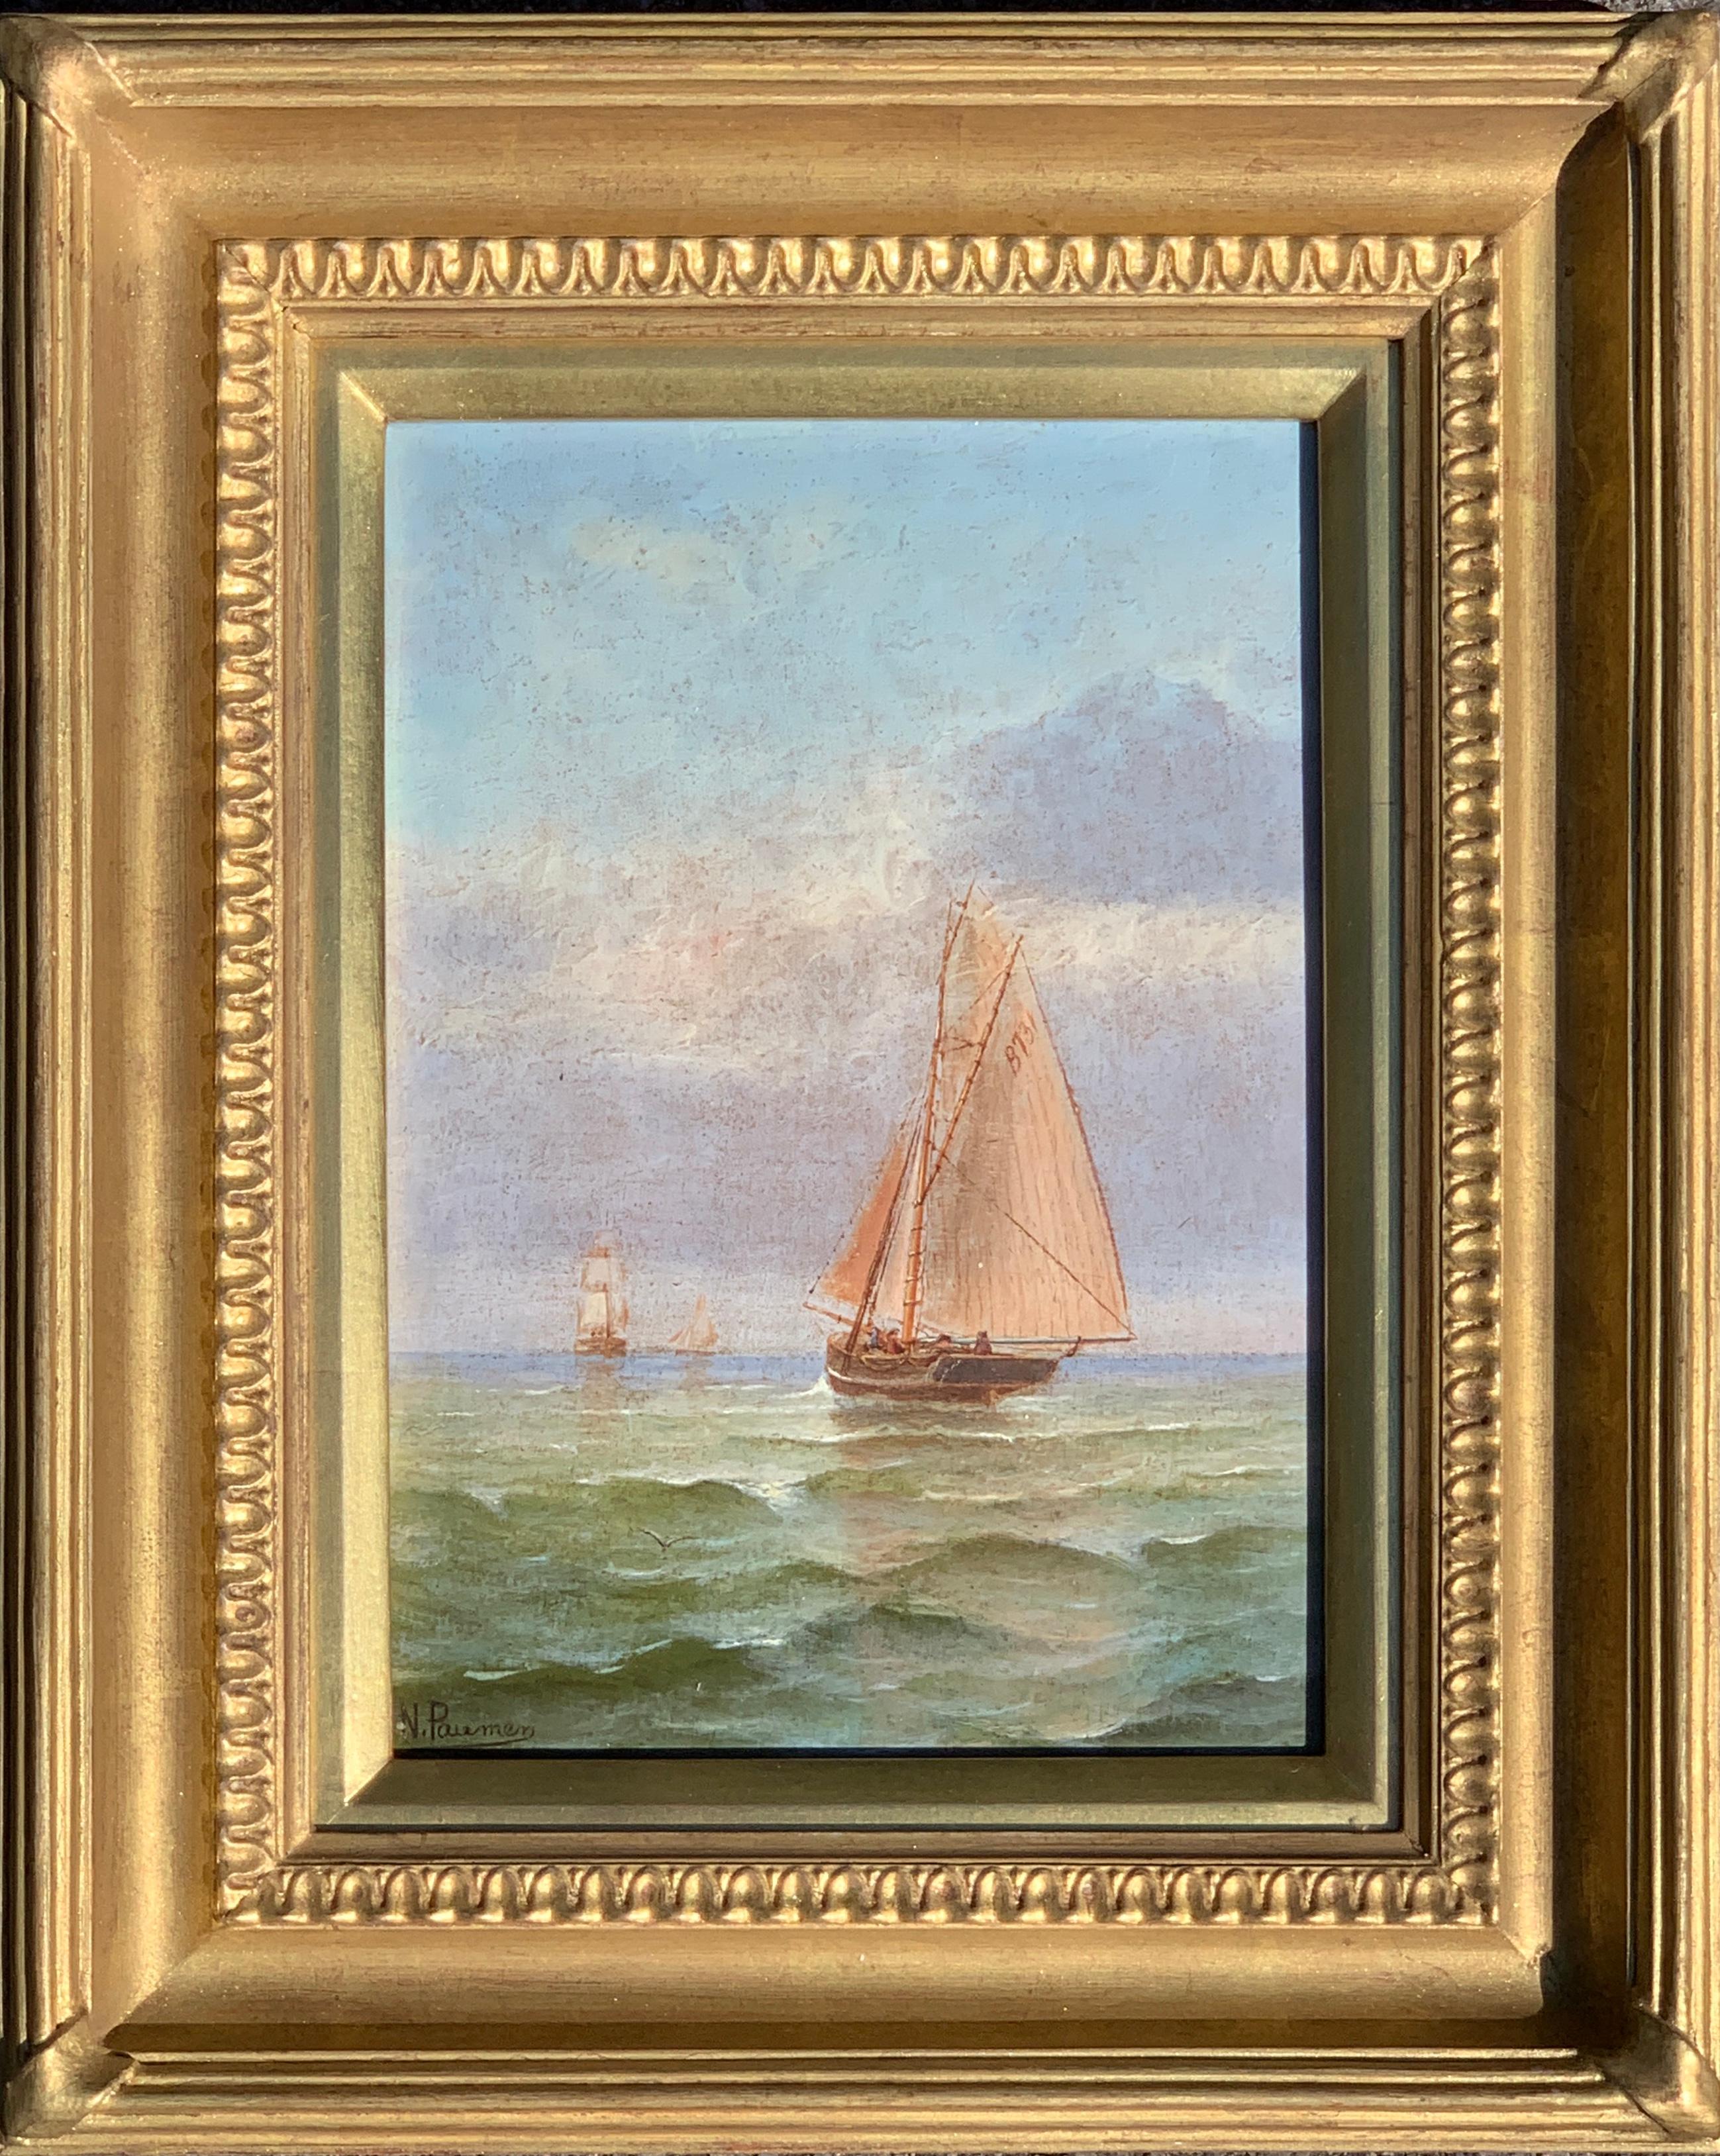 N. Pauman Figurative Painting - Oil painting, French 19th century Victorian Shipping scene at Morning time.